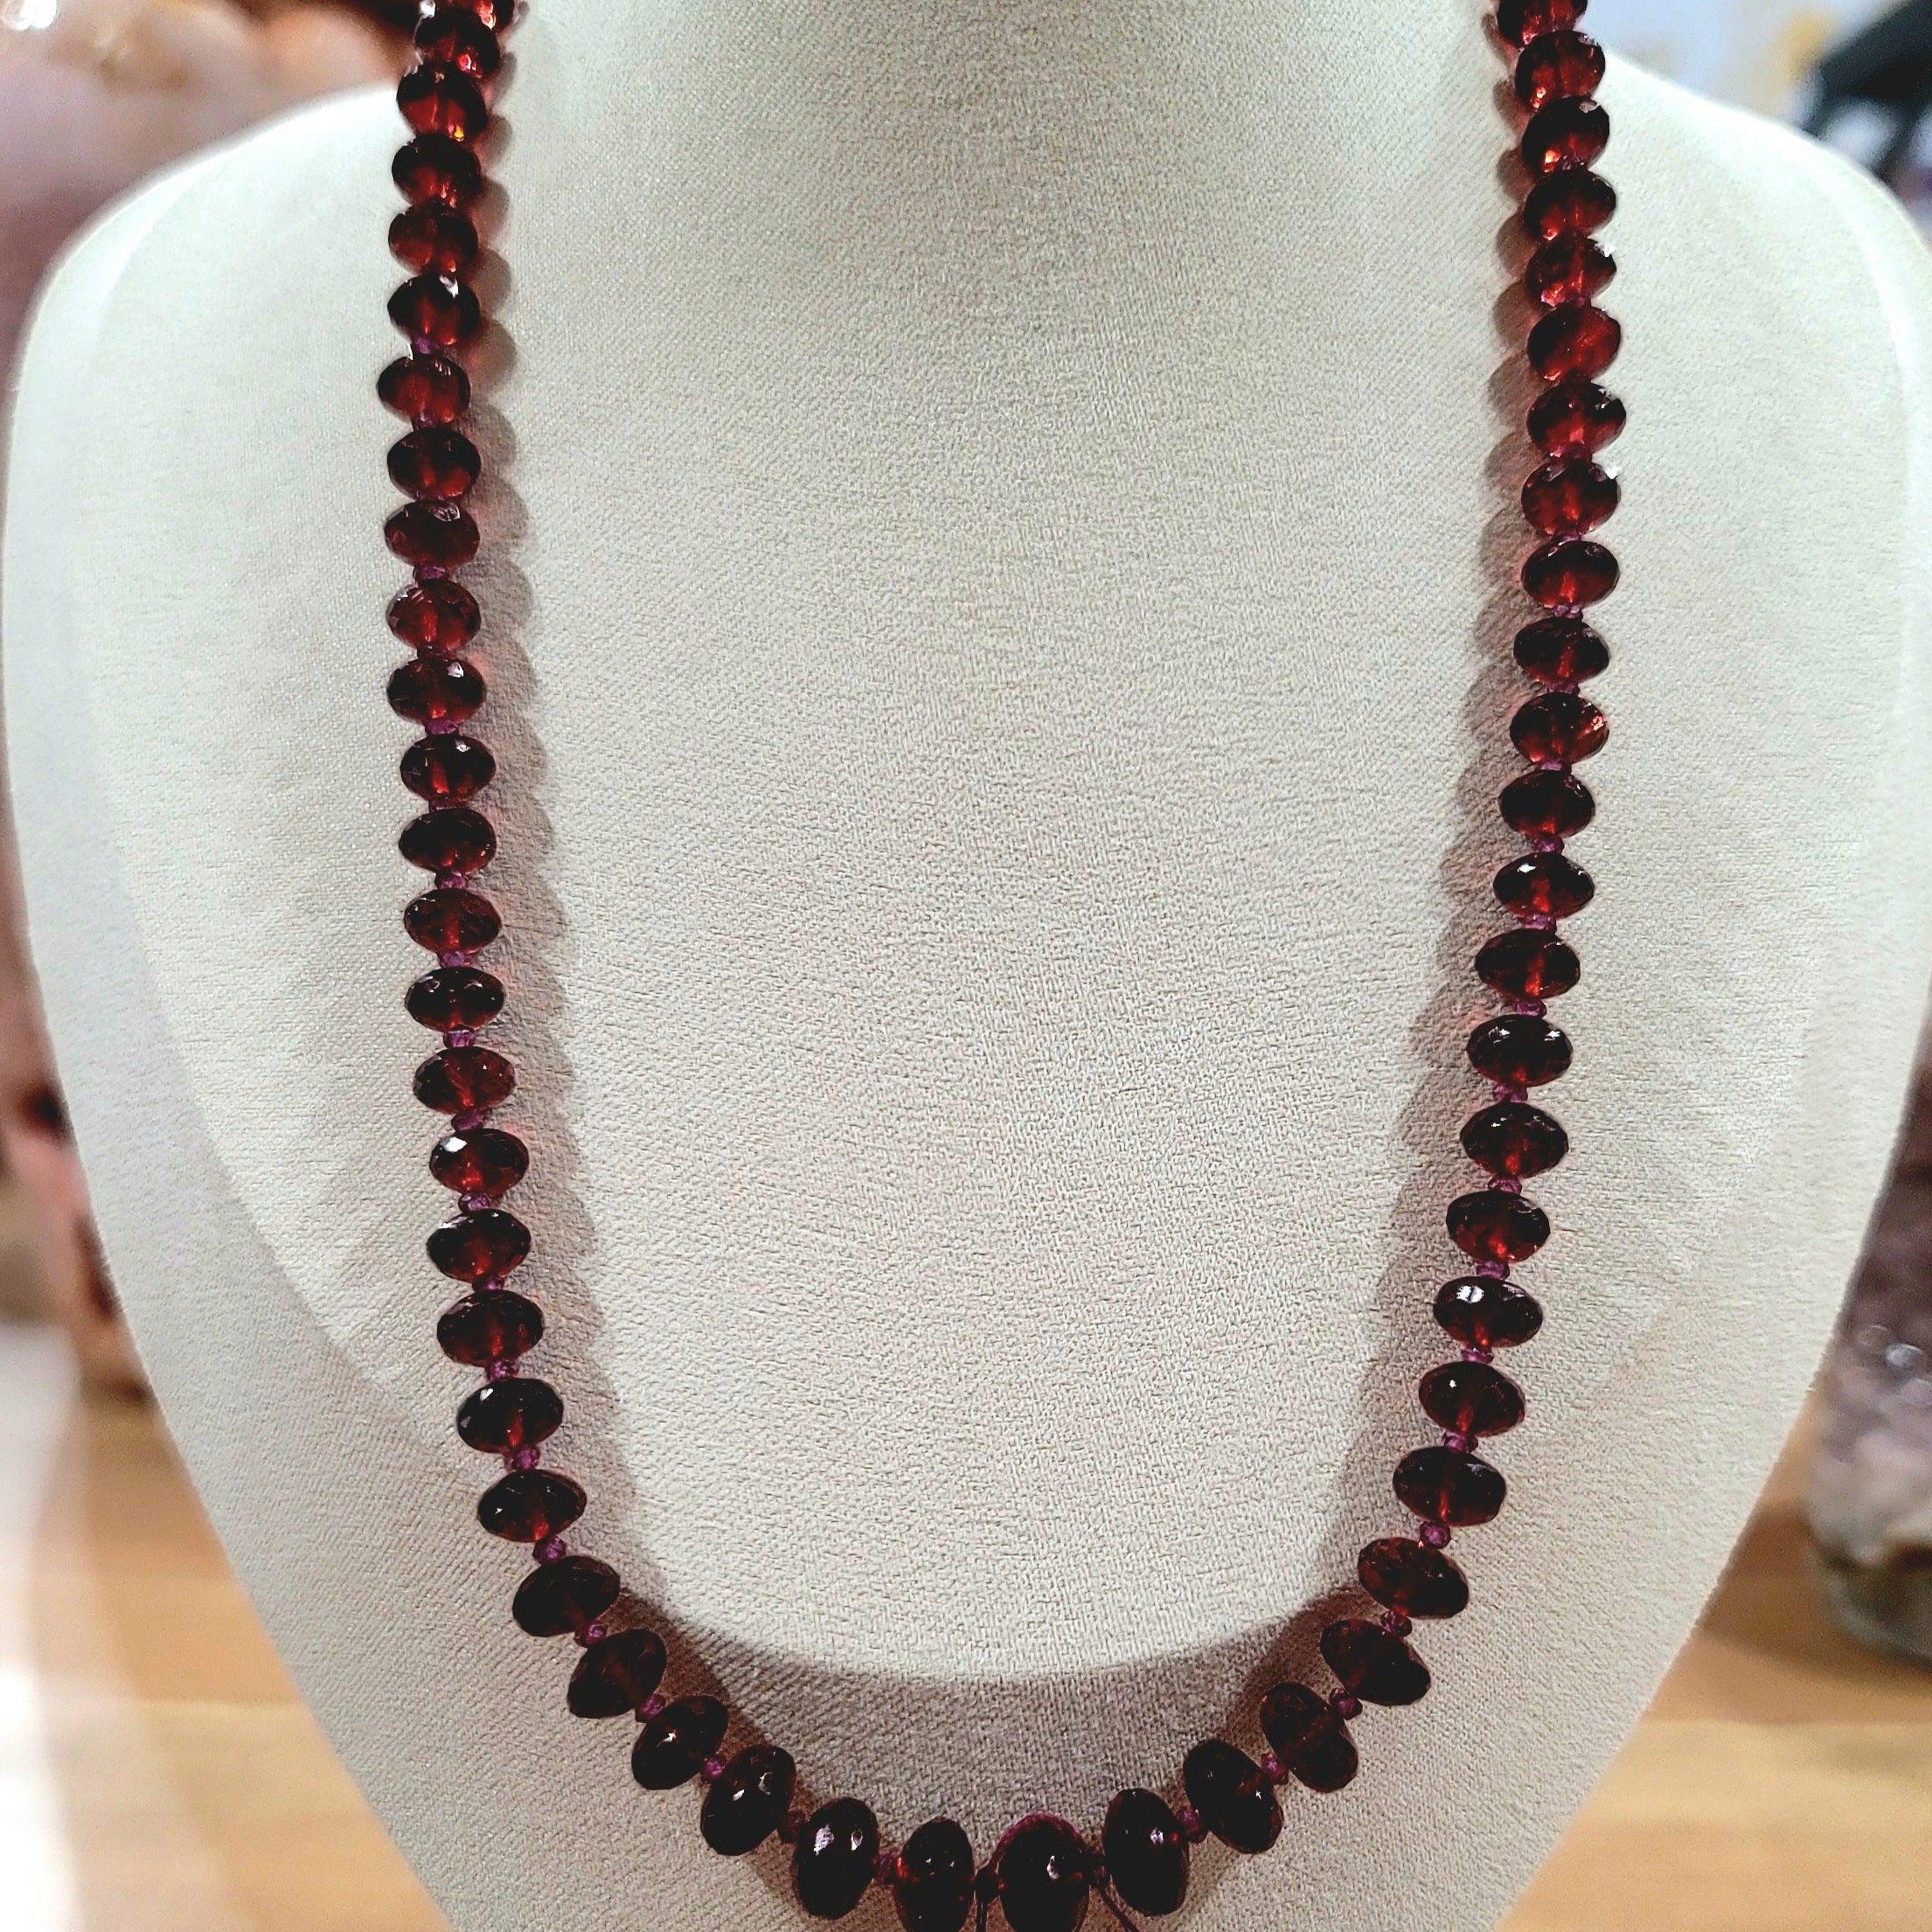 Garnet Necklace for Grounding, Health and Strength